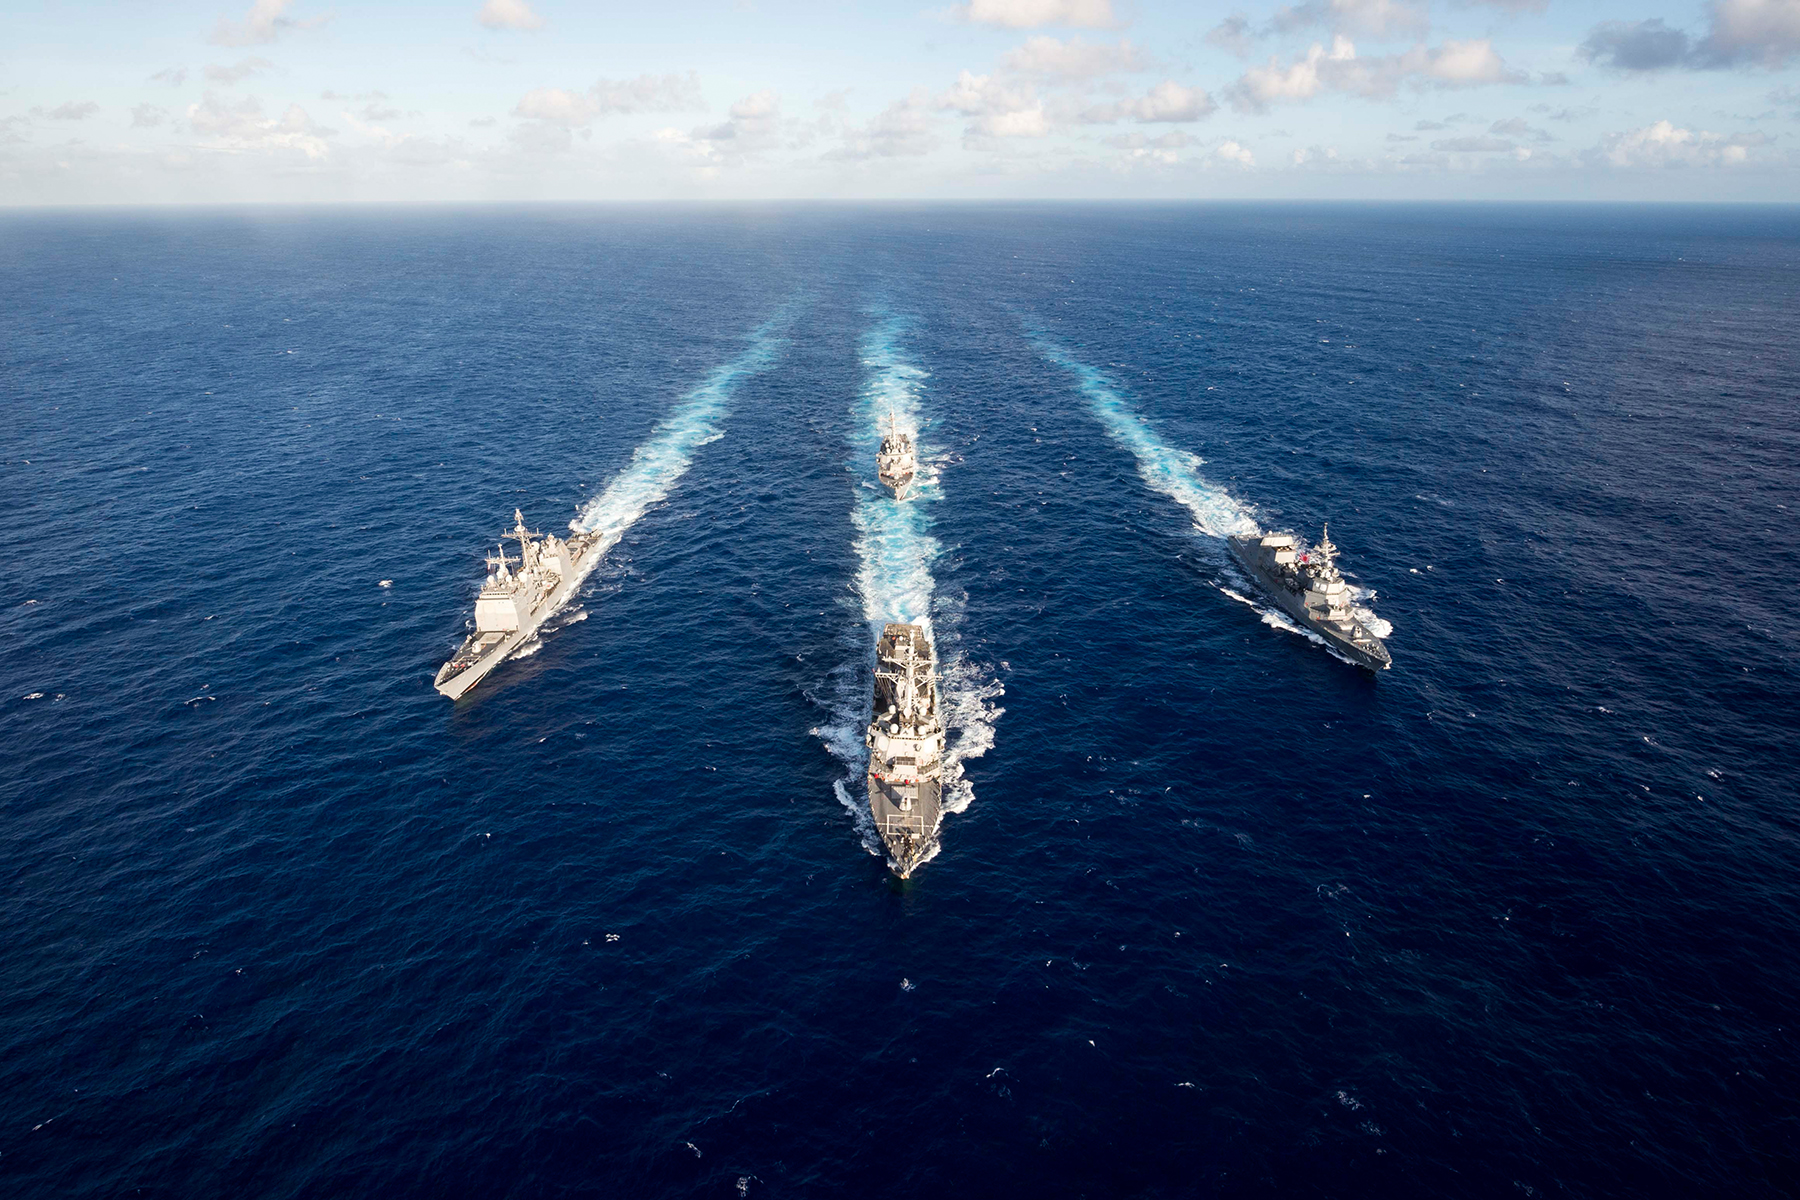 Guided-missile destroyer USS Mustin leads the guided-missile cruiser USS Antietam, USS Curtis Wilbur and the Japan Maritime Self-Defense Force ship JS Fuyuzuki in a formation for the completion of MultiSail 2018 on March 14, 2018, in the Philippine Sea. 